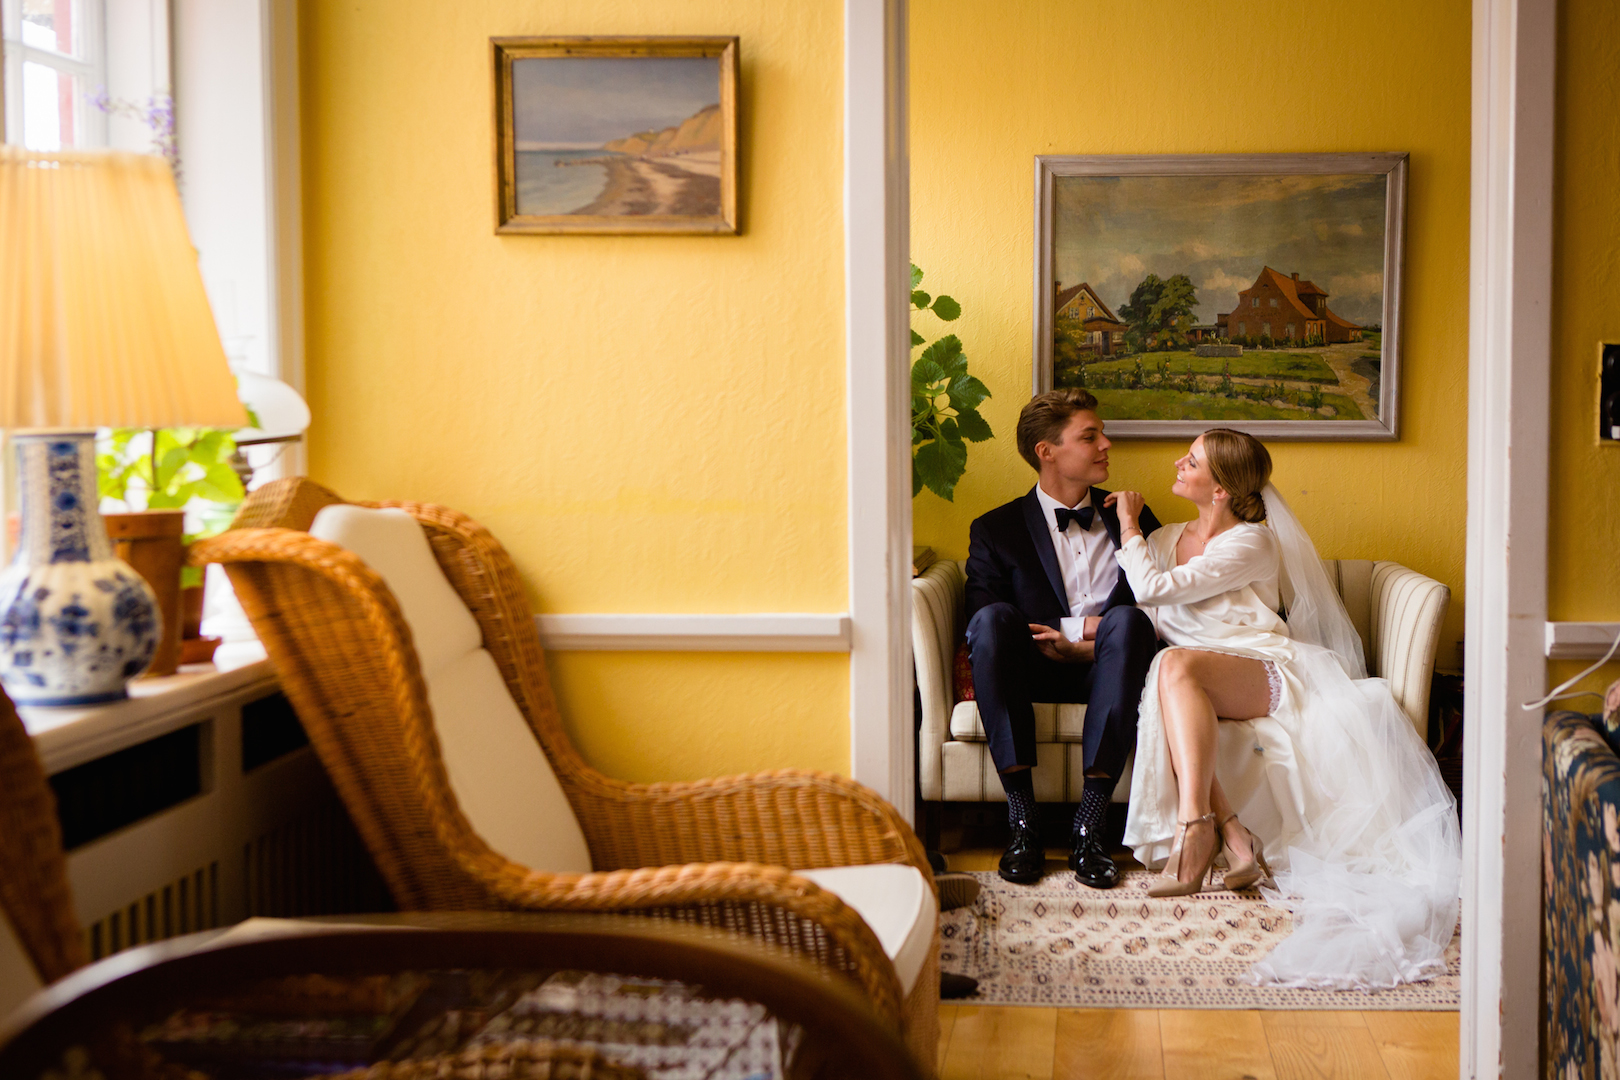 Bride and groom in the waiting room at the registry office of the Danish town of Rønne on Bornholm